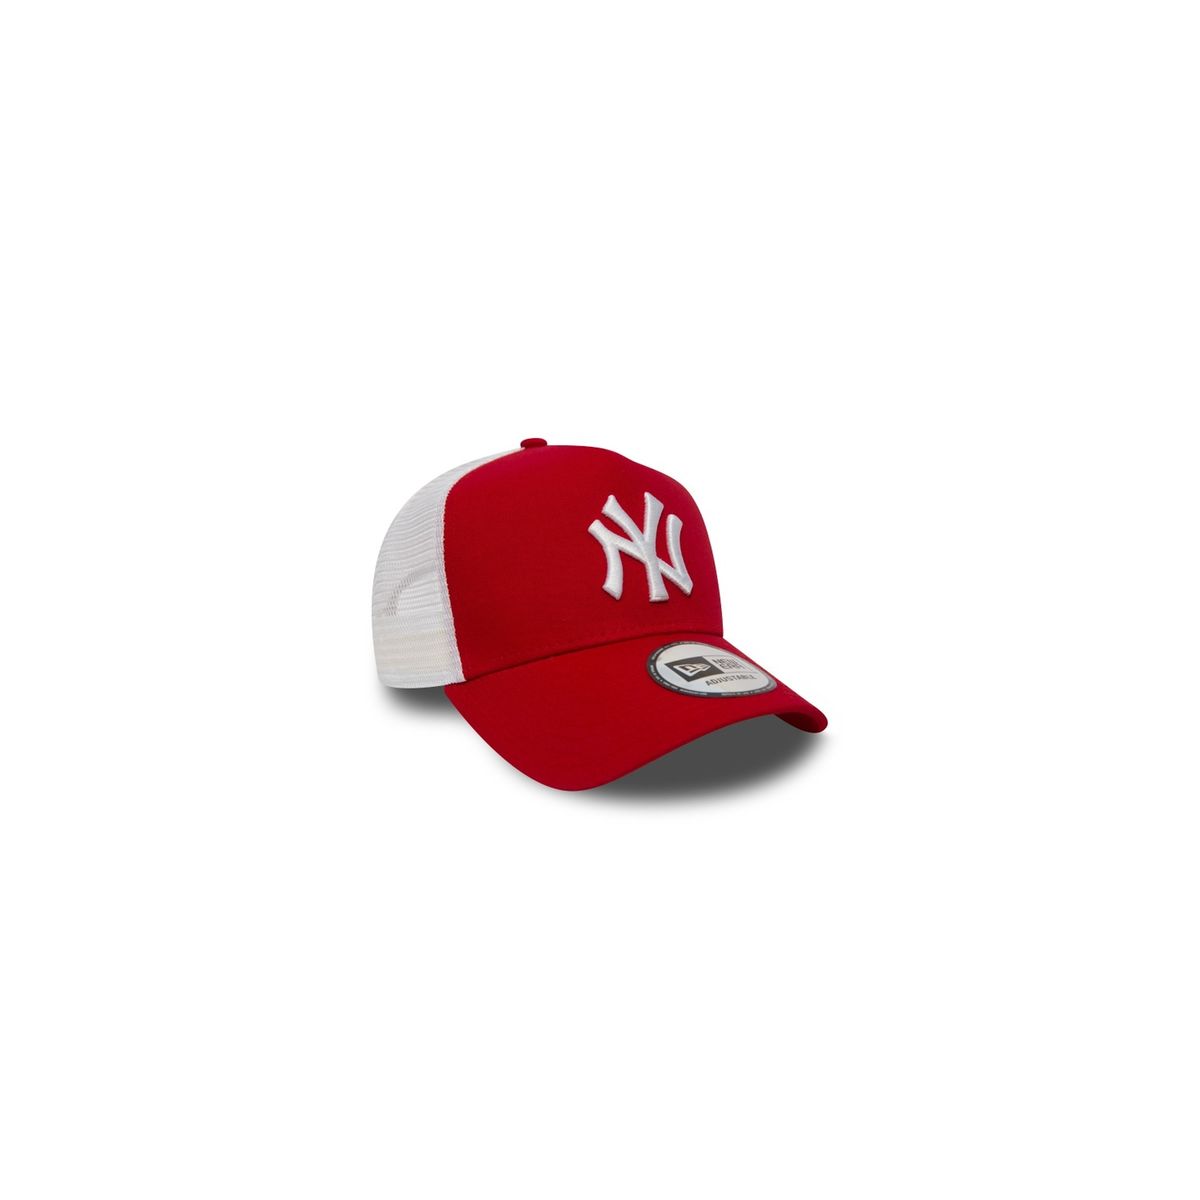 Casquette NY Rouge-R